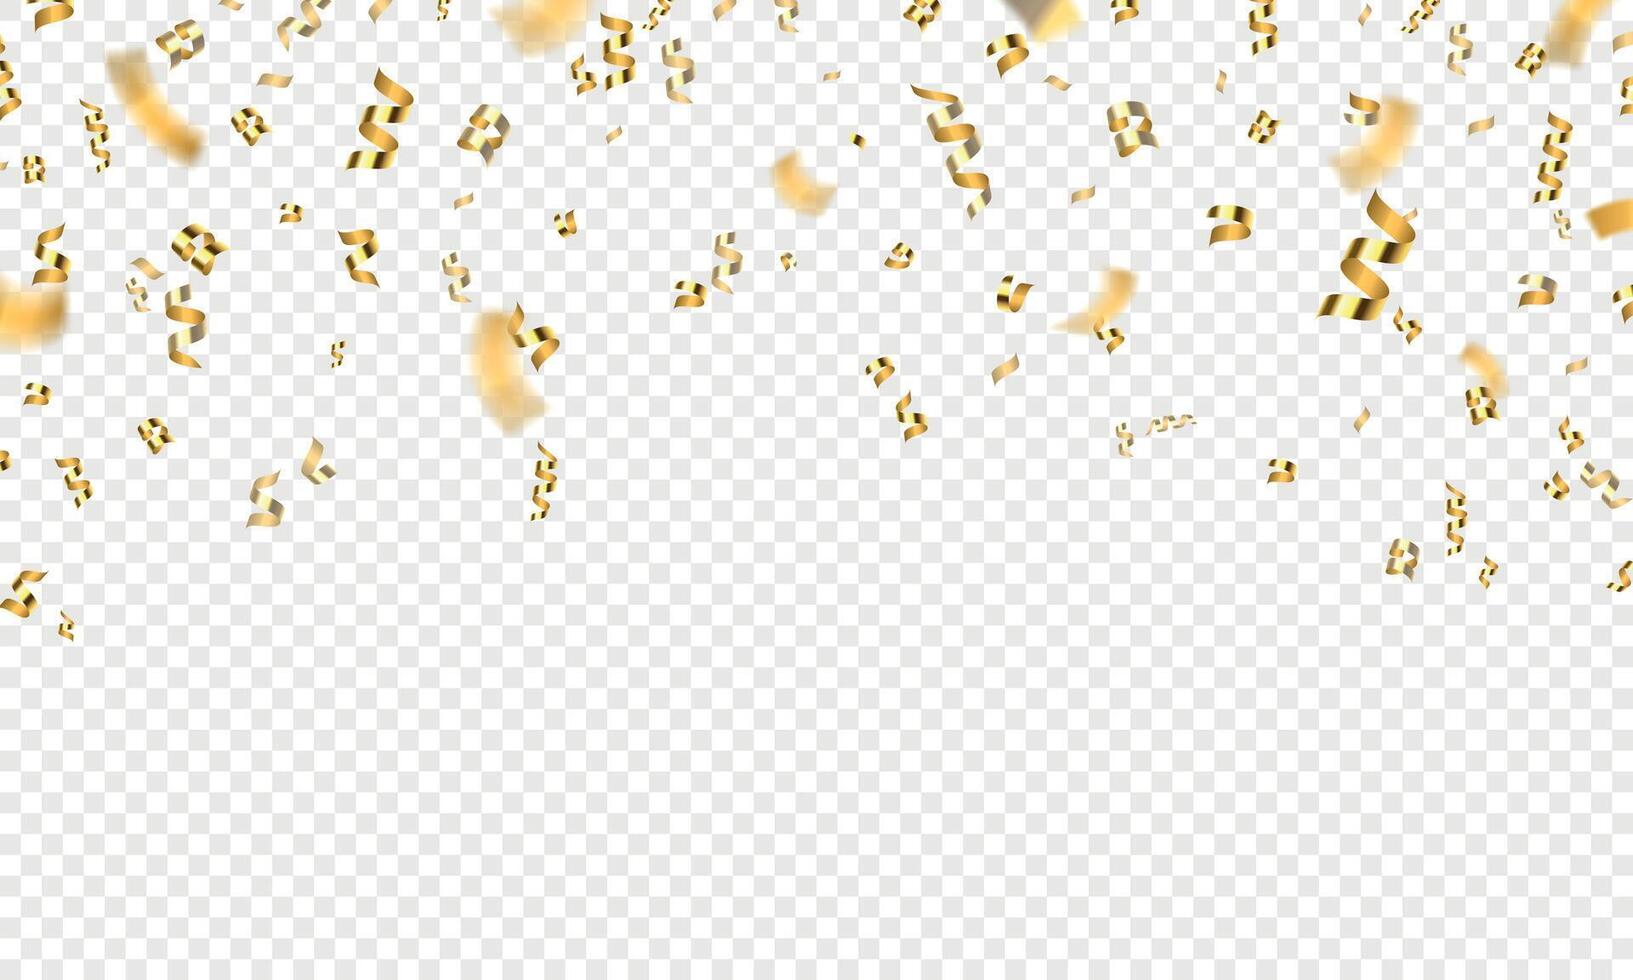 Golden falling 3d confetti, party or celebration background. Gold flying award tinsel, ribbon and glitter. Holiday festive vector decoration